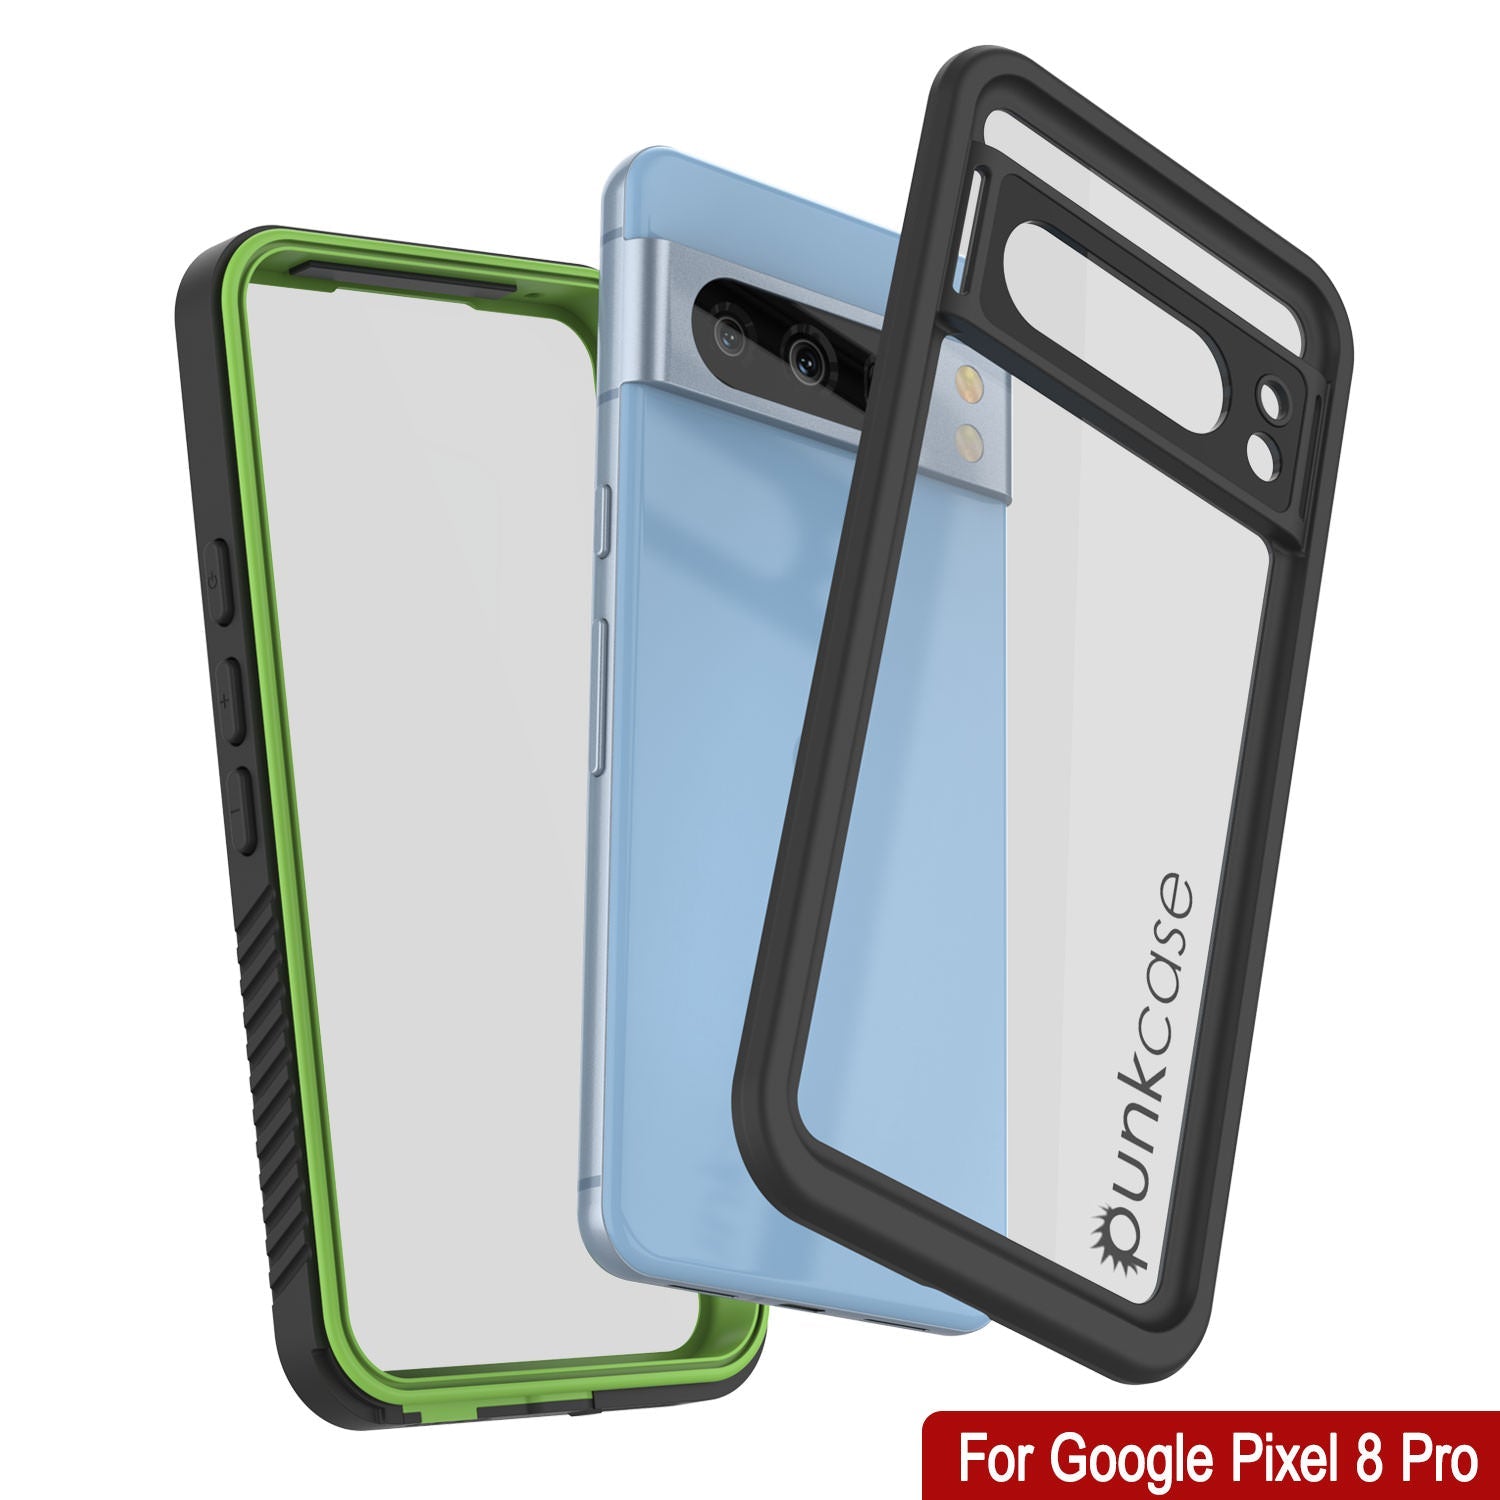 Google Pixel 8 Pro Waterproof Case, Punkcase [Extreme Series] Armor Cover W/ Built In Screen Protector [Light Green]